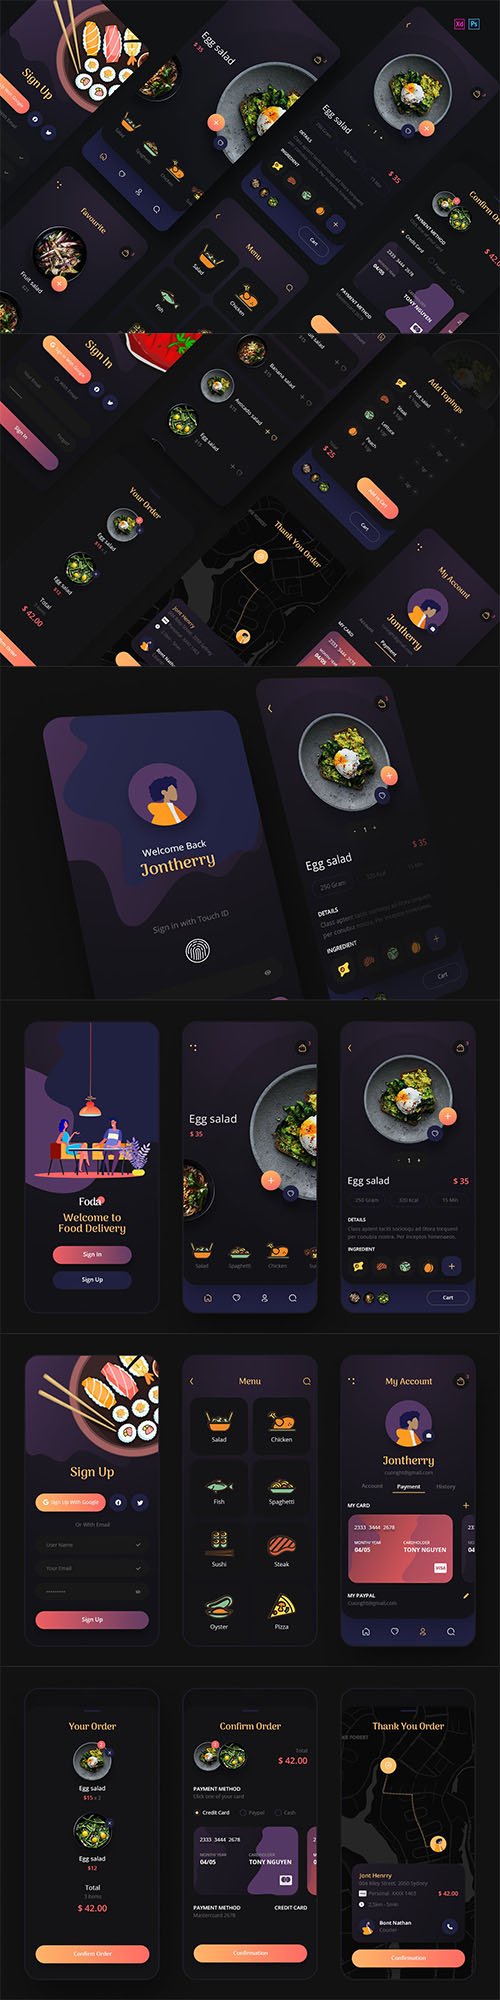 Foda - Food Delivery Mobile App UX, UI Template